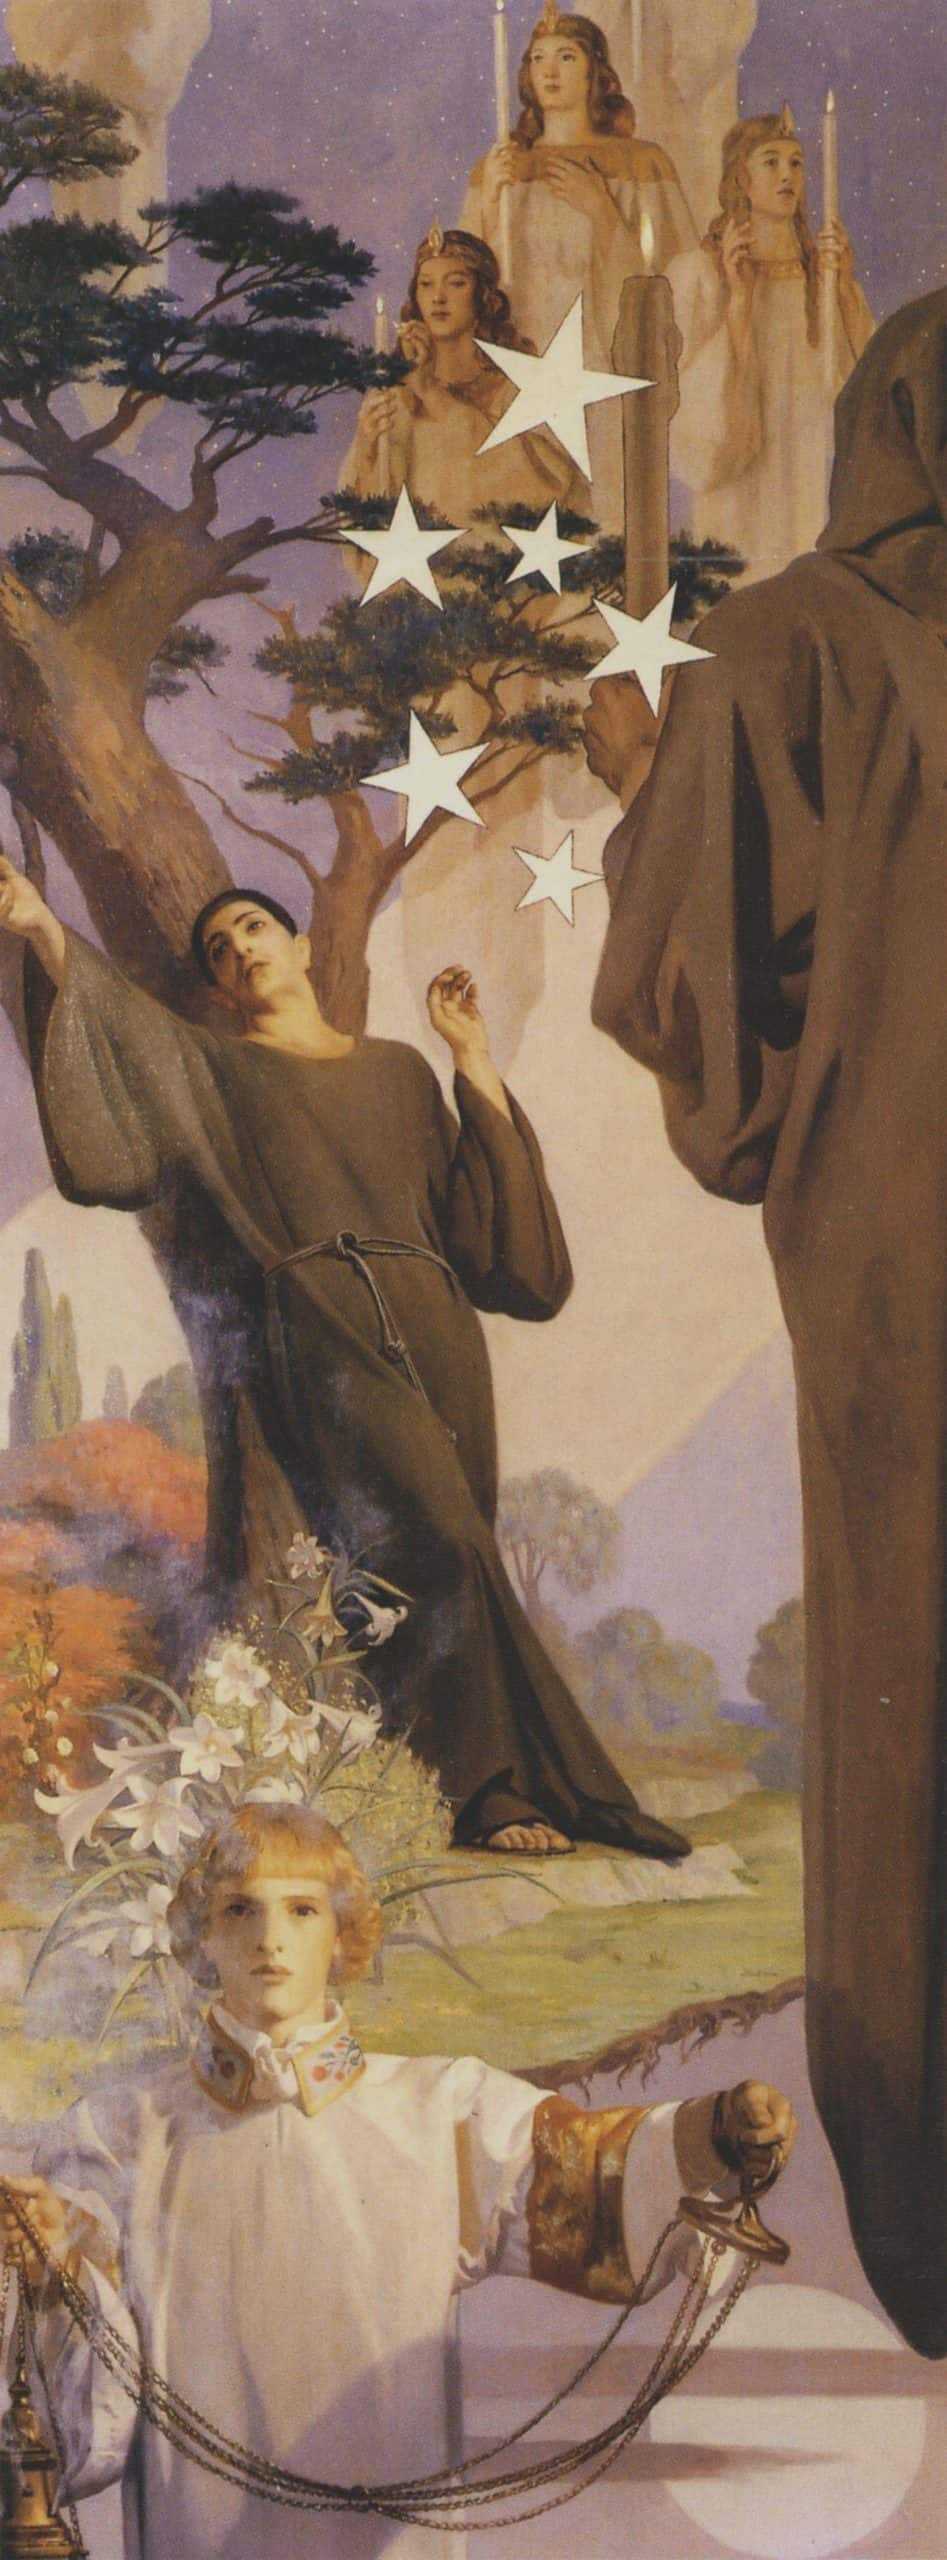 Elizabeth on R.H. Ives Gammell's "The Hound of Heaven" at Maryhill